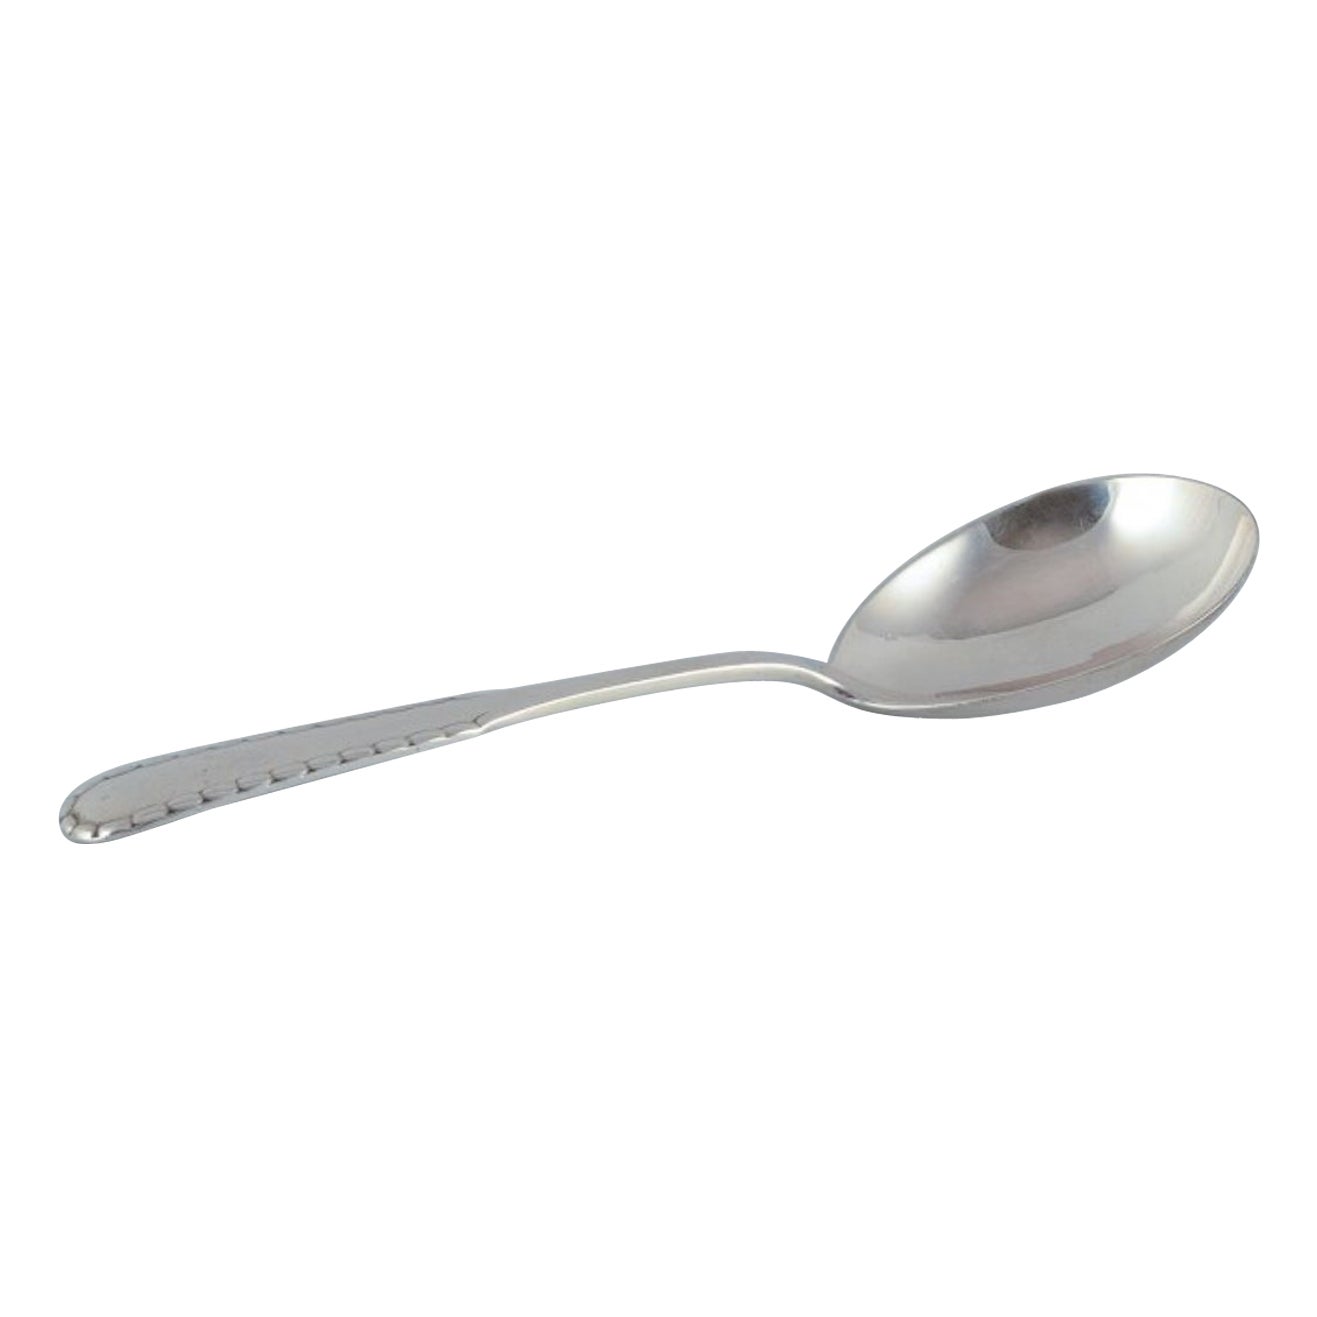 Georg Jensen "Rope" serving spoon in sterling silver.  For Sale